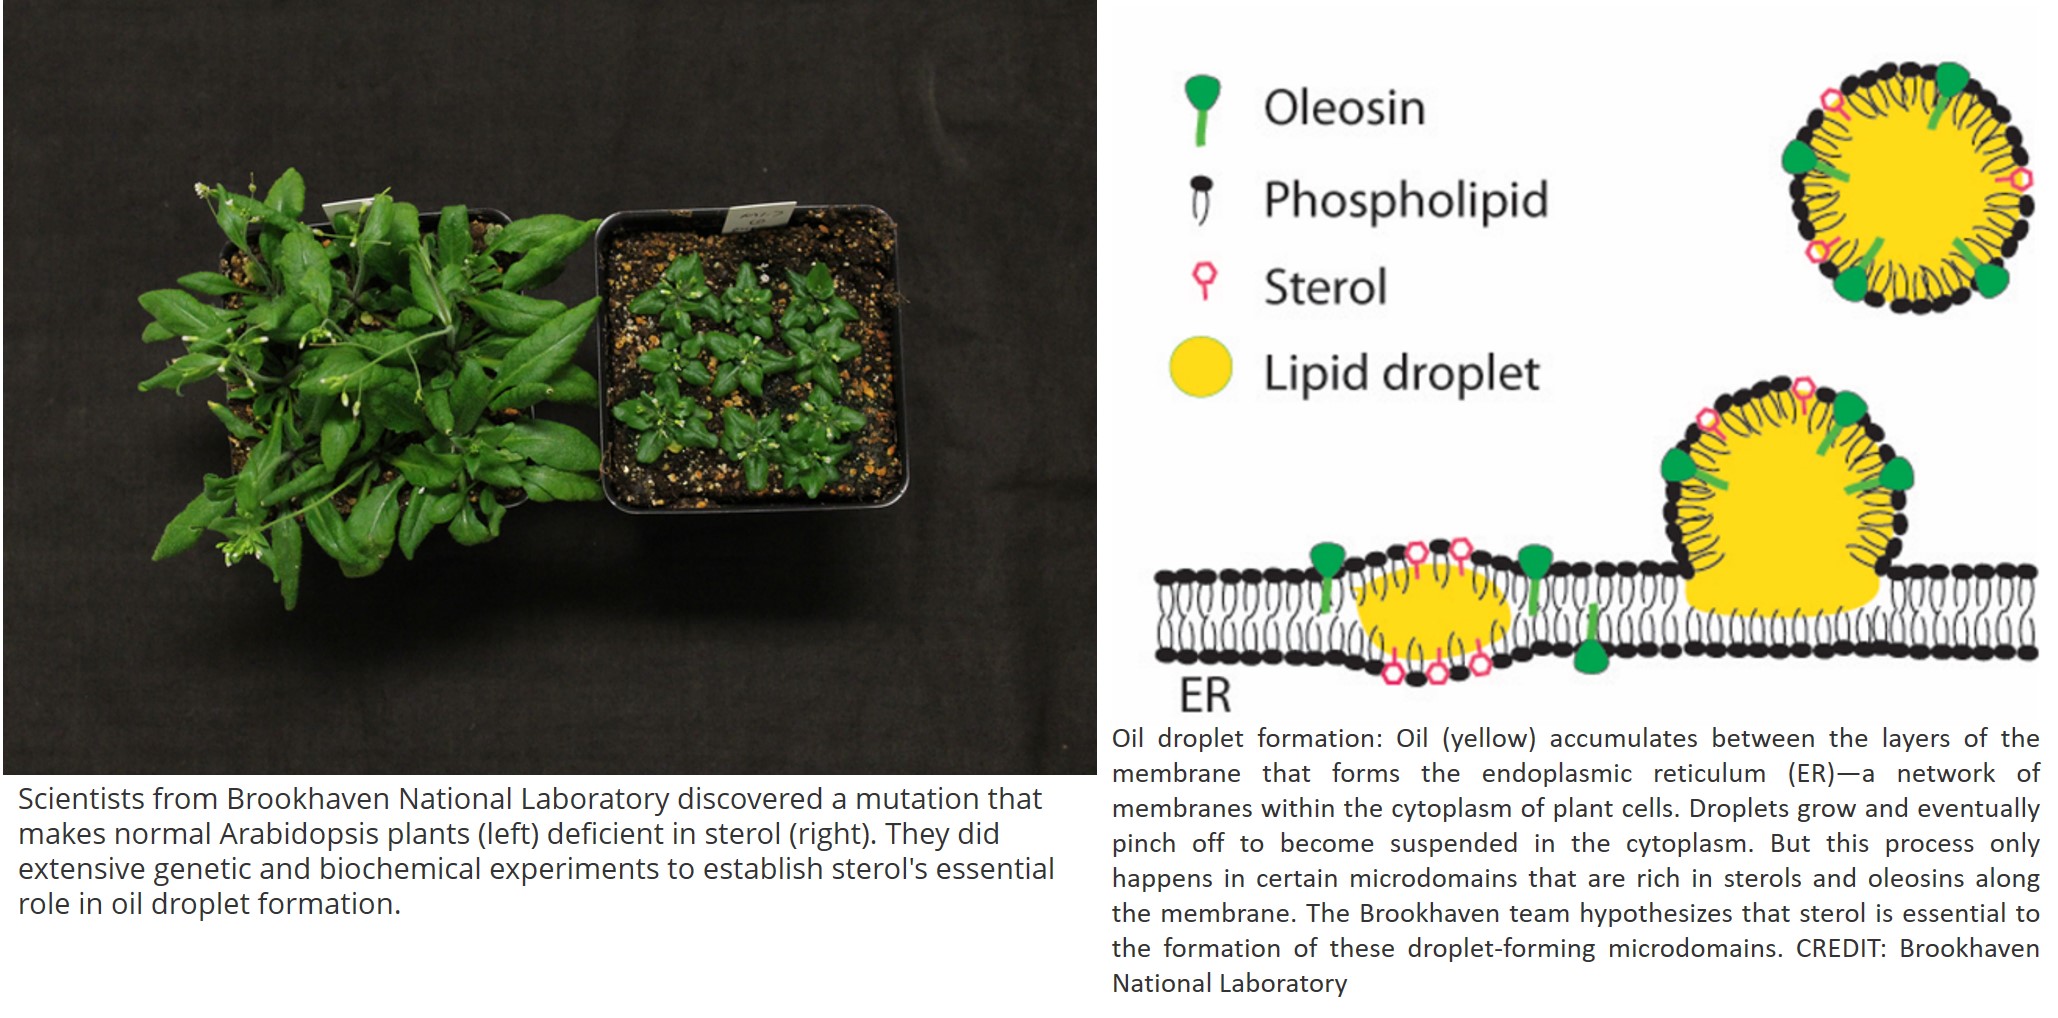 Assembly of lipid droplets in developing seeds require sterols